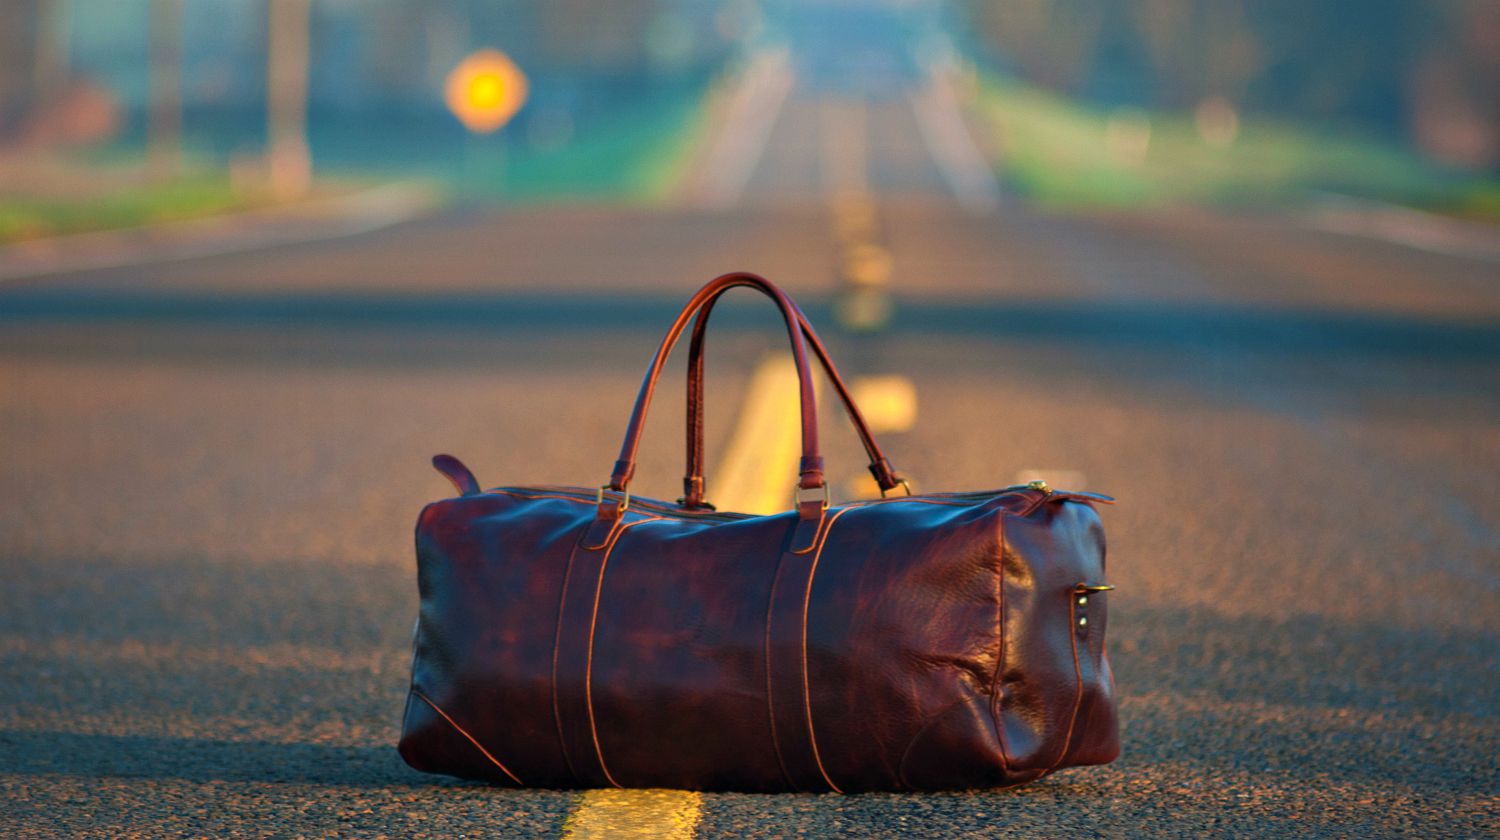 Feature | A brown leather duffel bag in middle on gray asphalt road | Preparedness Tips: Prepping For Travel